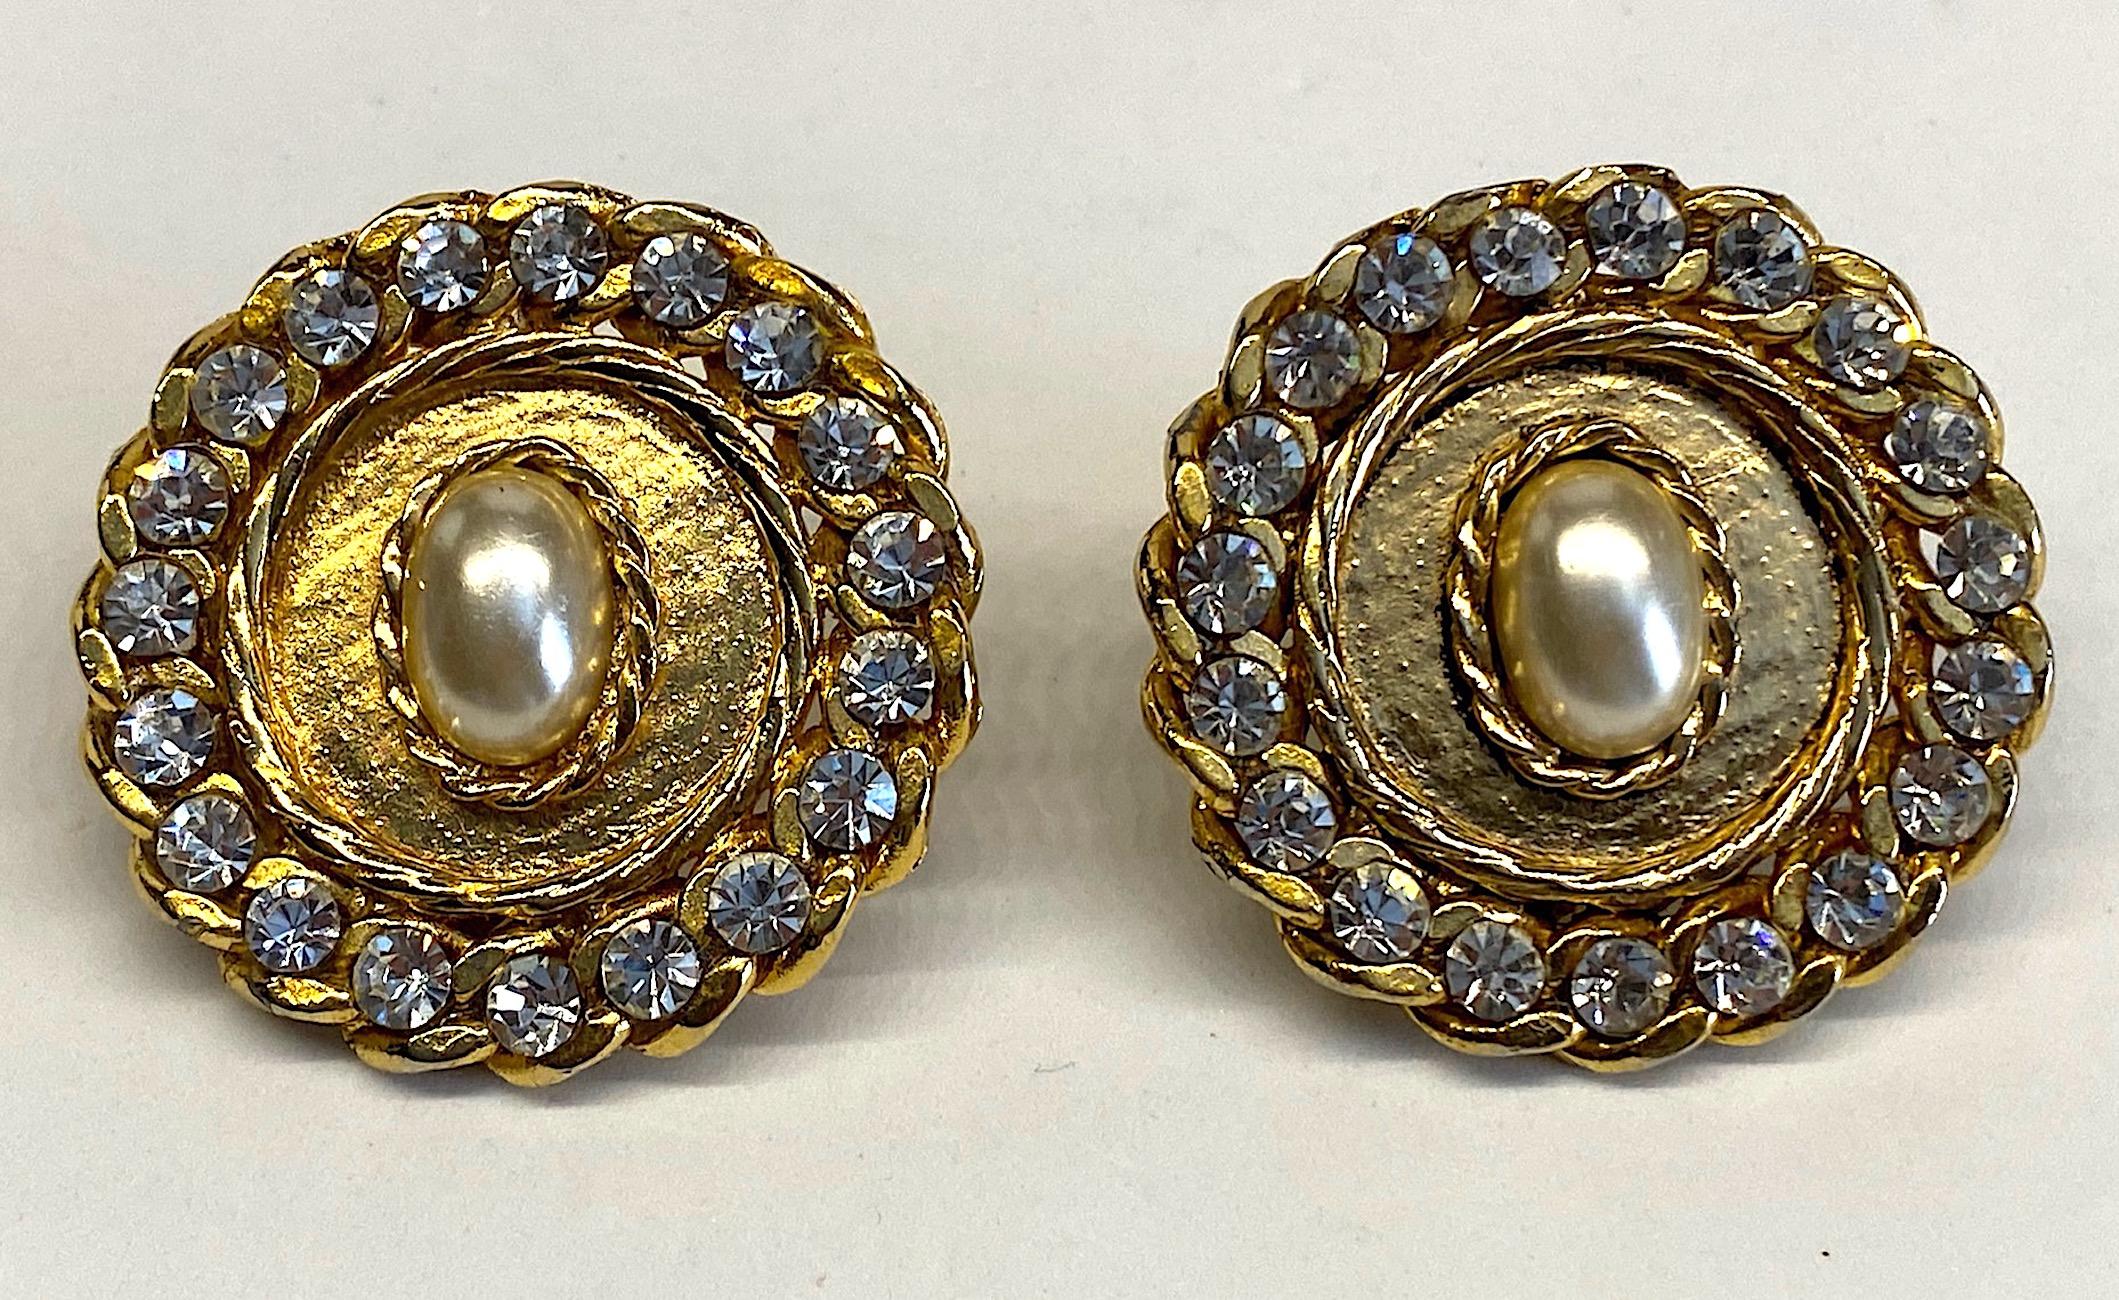 A large pair of 1980s button medallion earrings. Each earring is 1.75 inches in diameter and has an oval faux pearl cabochon in the center. The pearl is surrounded by a rope twist braid and matching curb link chain set with rhinestones. They are